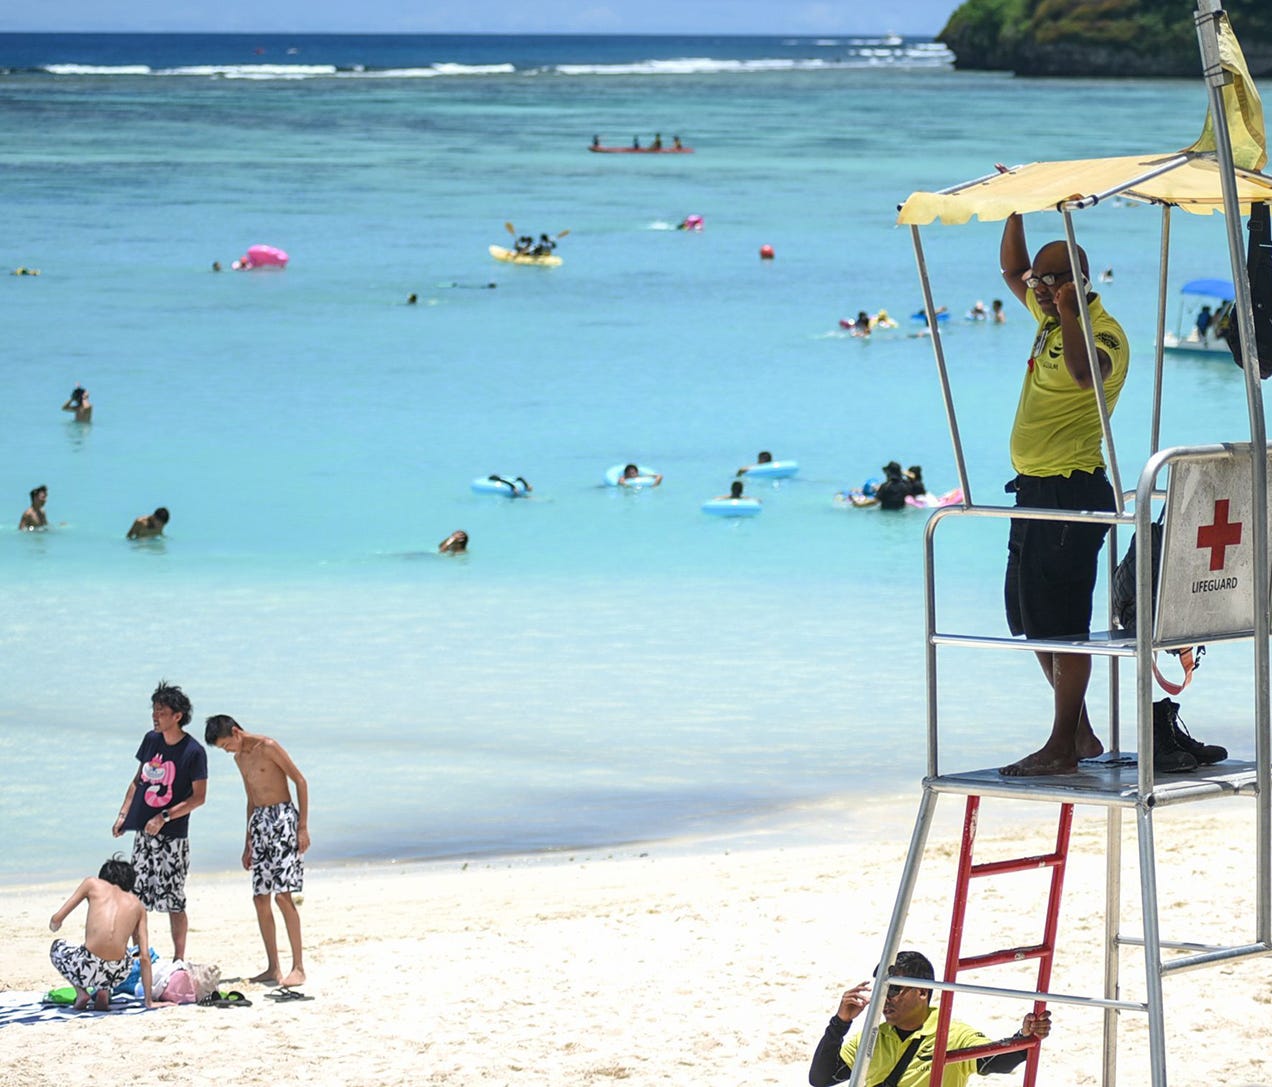 Visitor Safety Officer Fletcher Persinger looks out to the beach in Tumon, Guam, near the Outrigger Guam Resort on Aug. 9, 2017. Despite recent tensions between the U.S. and North Korea, tourism with South Korea was up 5% over the weekend ended Sunda